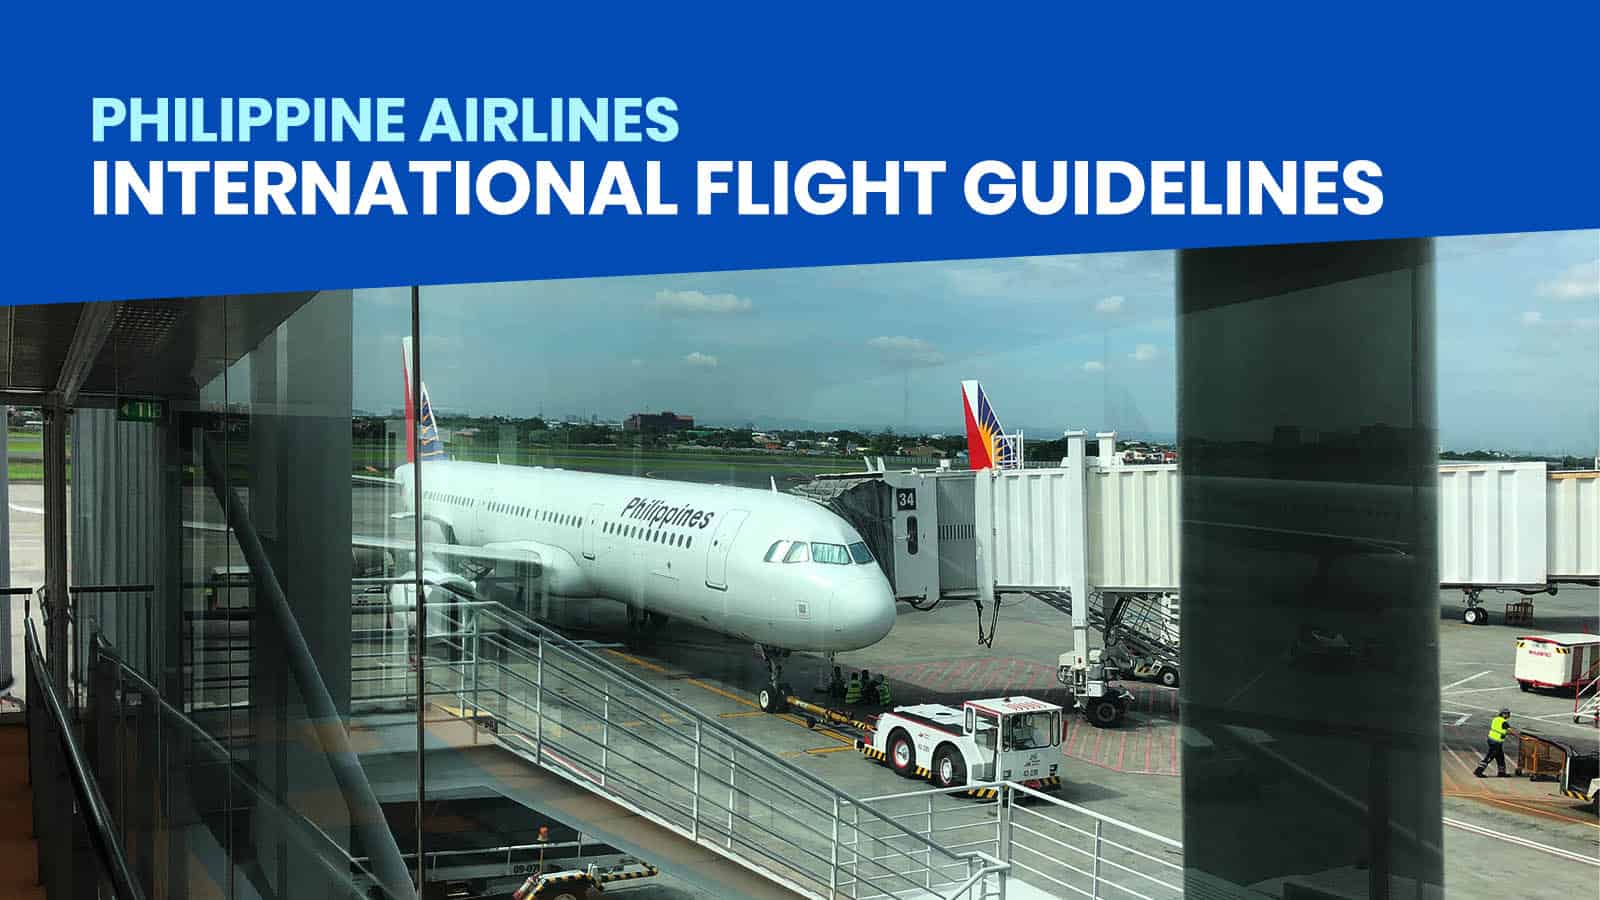 PHILIPPINE AIRLINES: Guidelines for International Departures and Arrivals